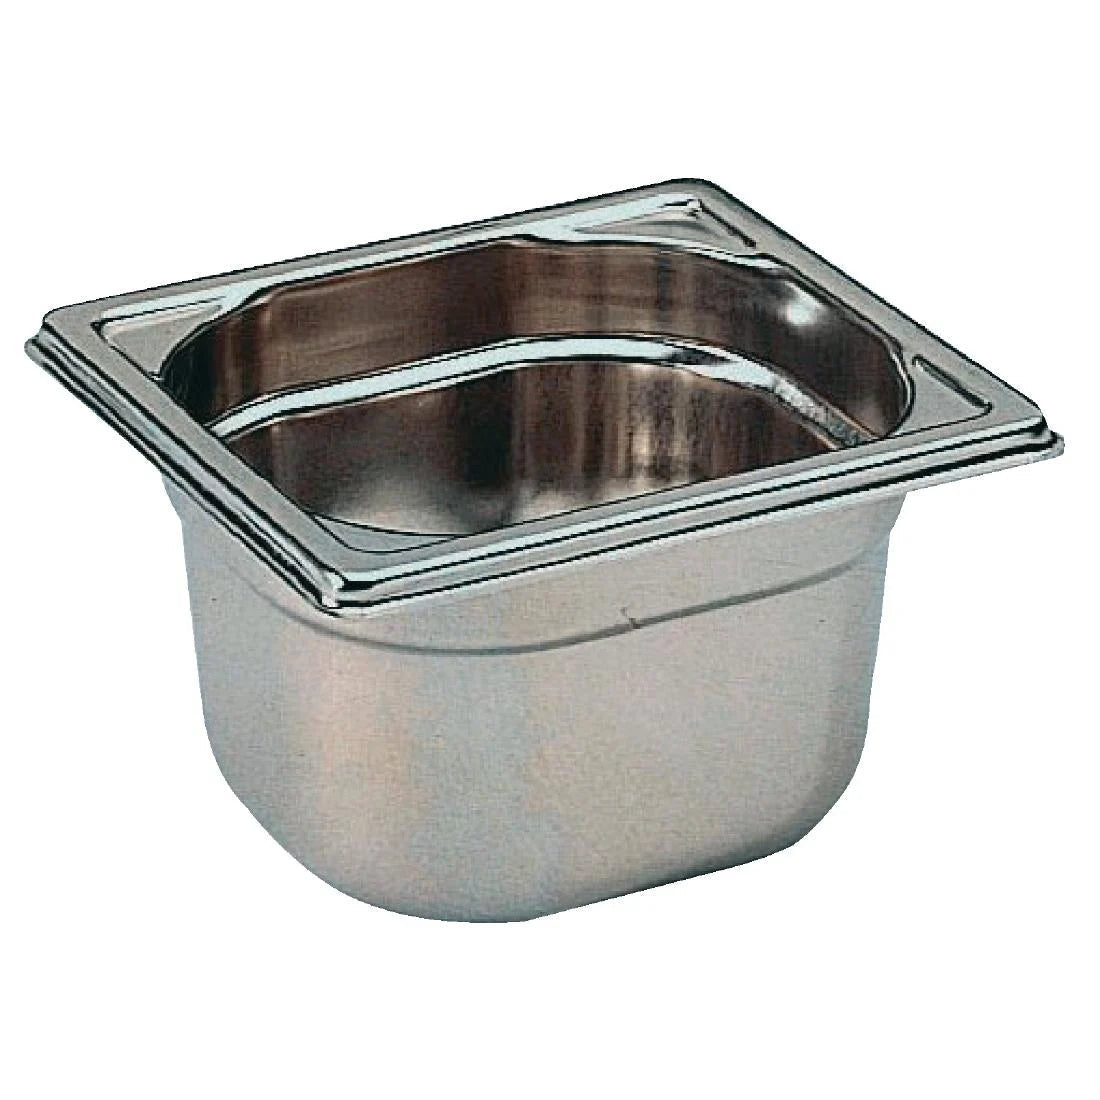 Bourgeat Stainless Steel 1/6 Gastronorm Pan 65mm JD Catering Equipment Solutions Ltd